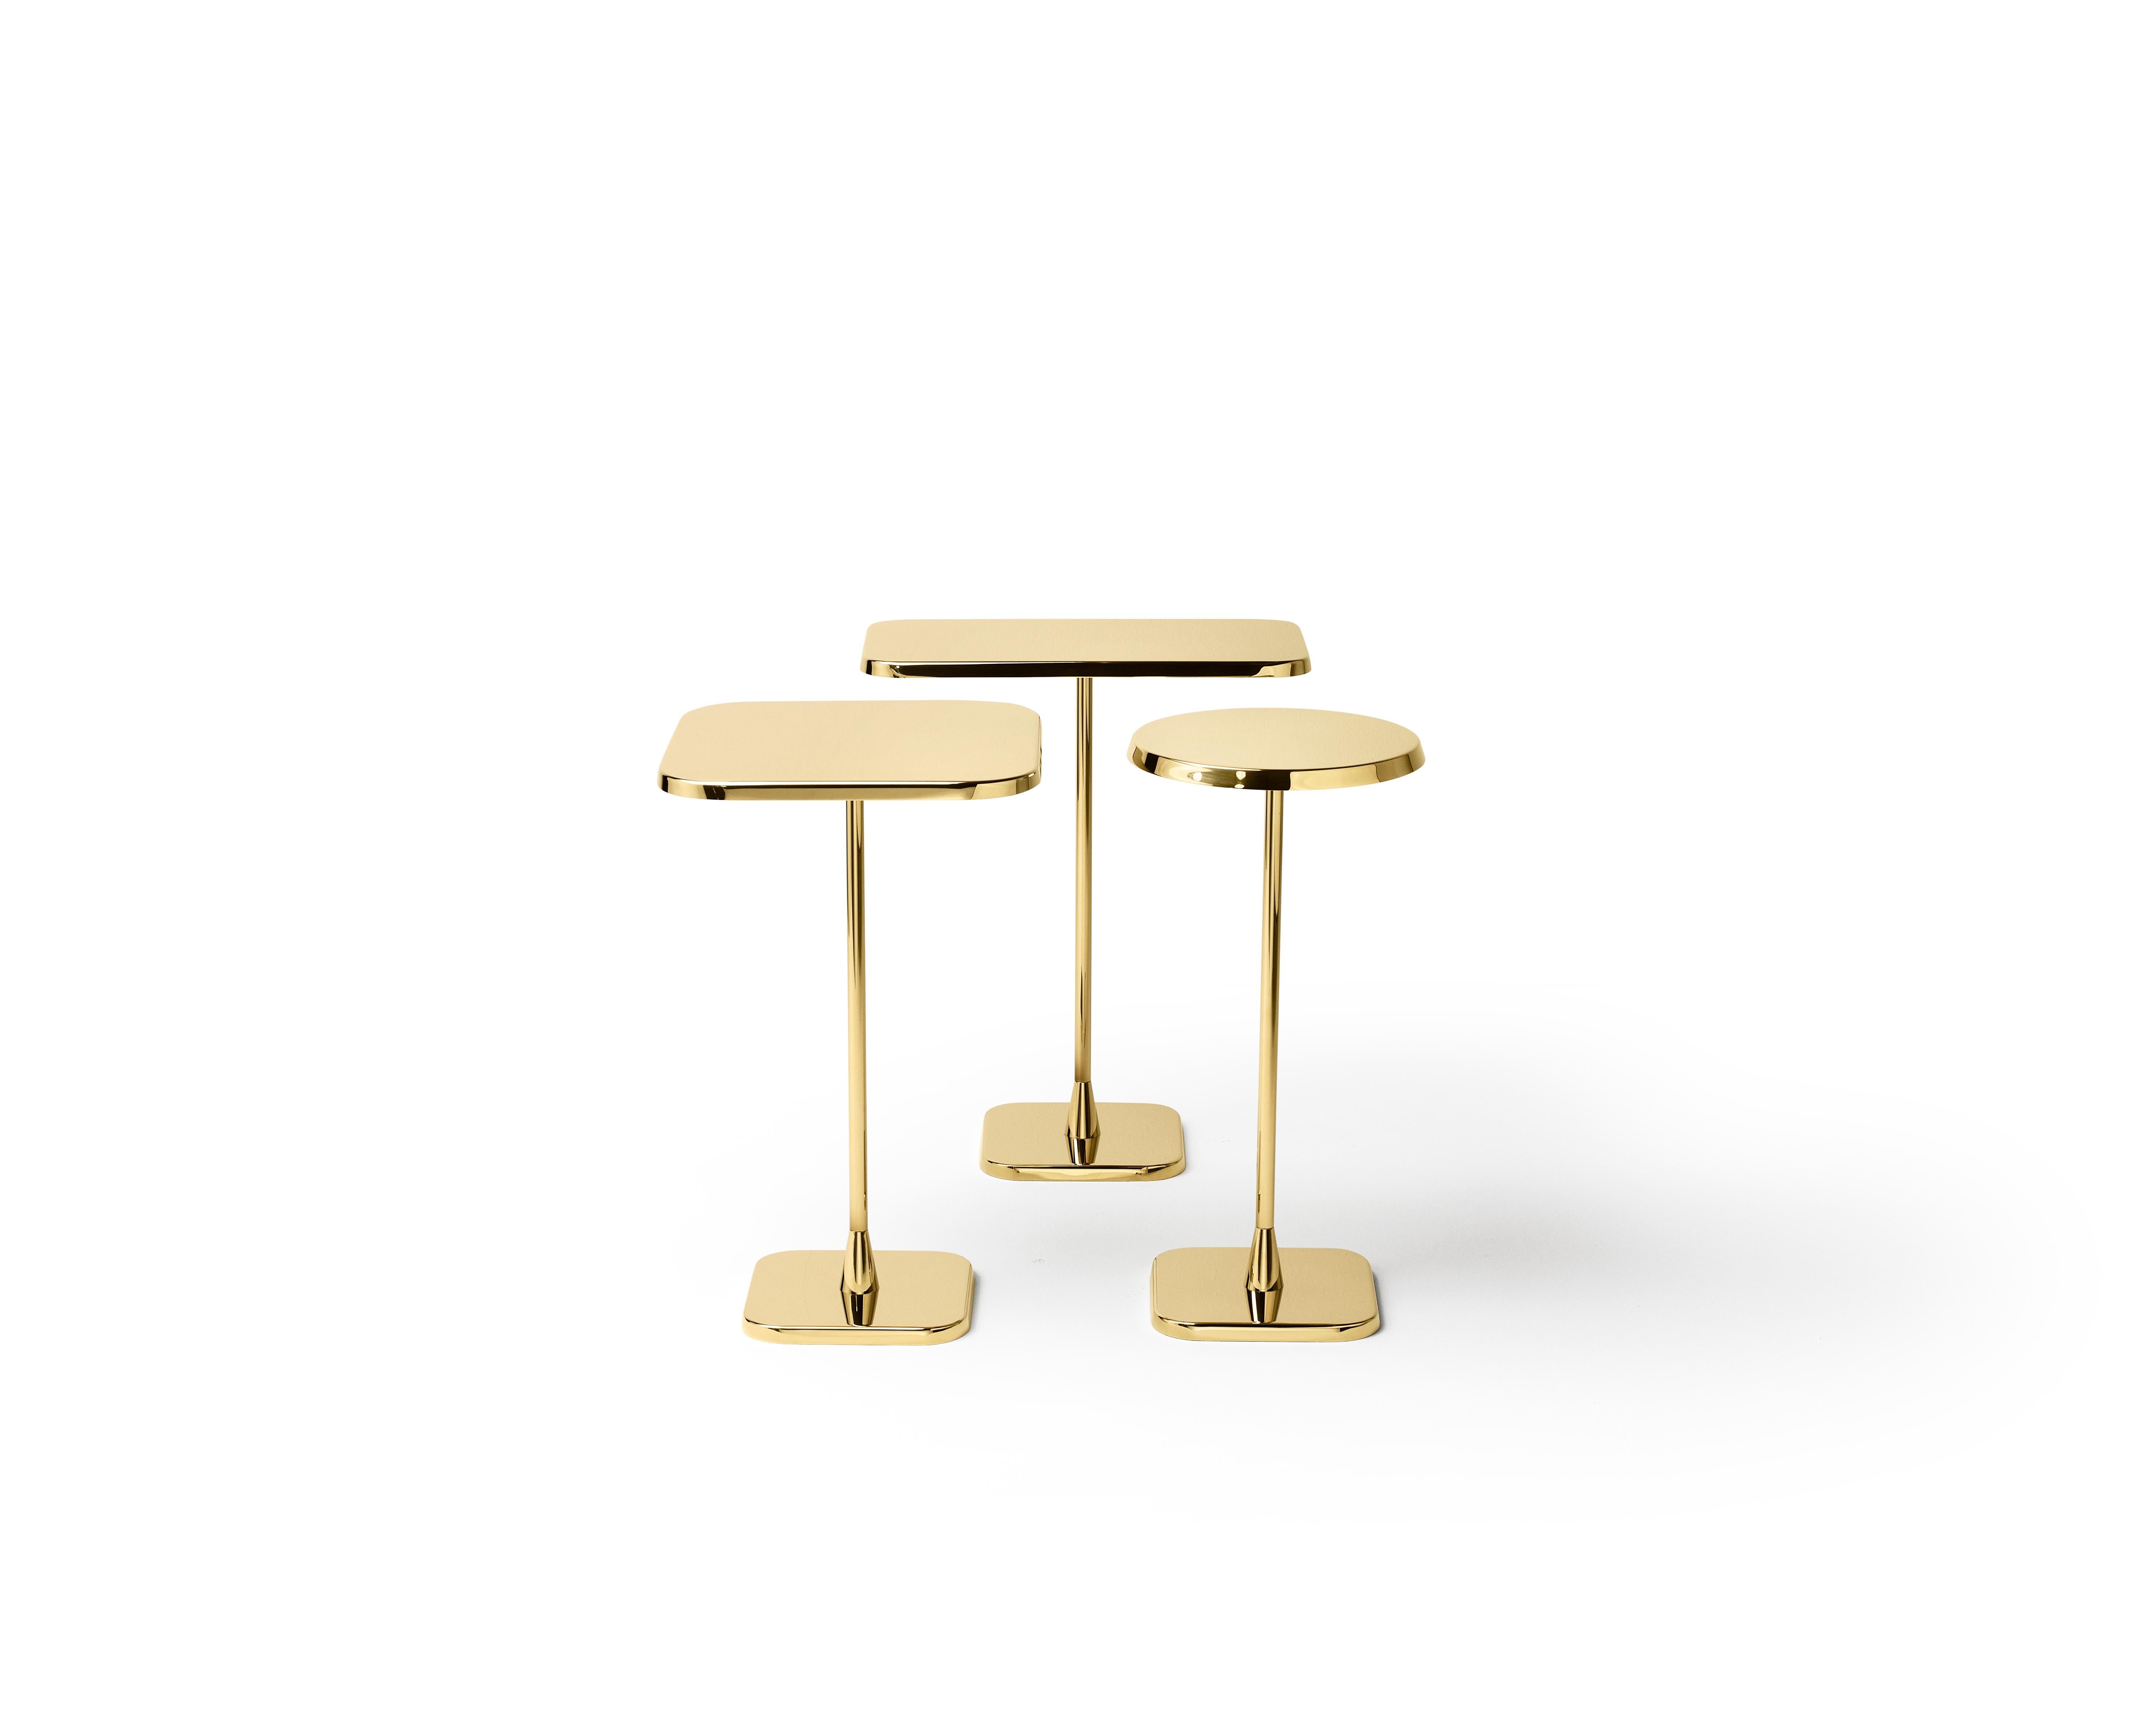 Rectangular table in stainless steel
For the interior design of the Dutch national Opera and ballet Hutten designed these simple yet elegant and very useful side tables.

Material:
Stainless steel with pvd treatment stainless steel with pvd